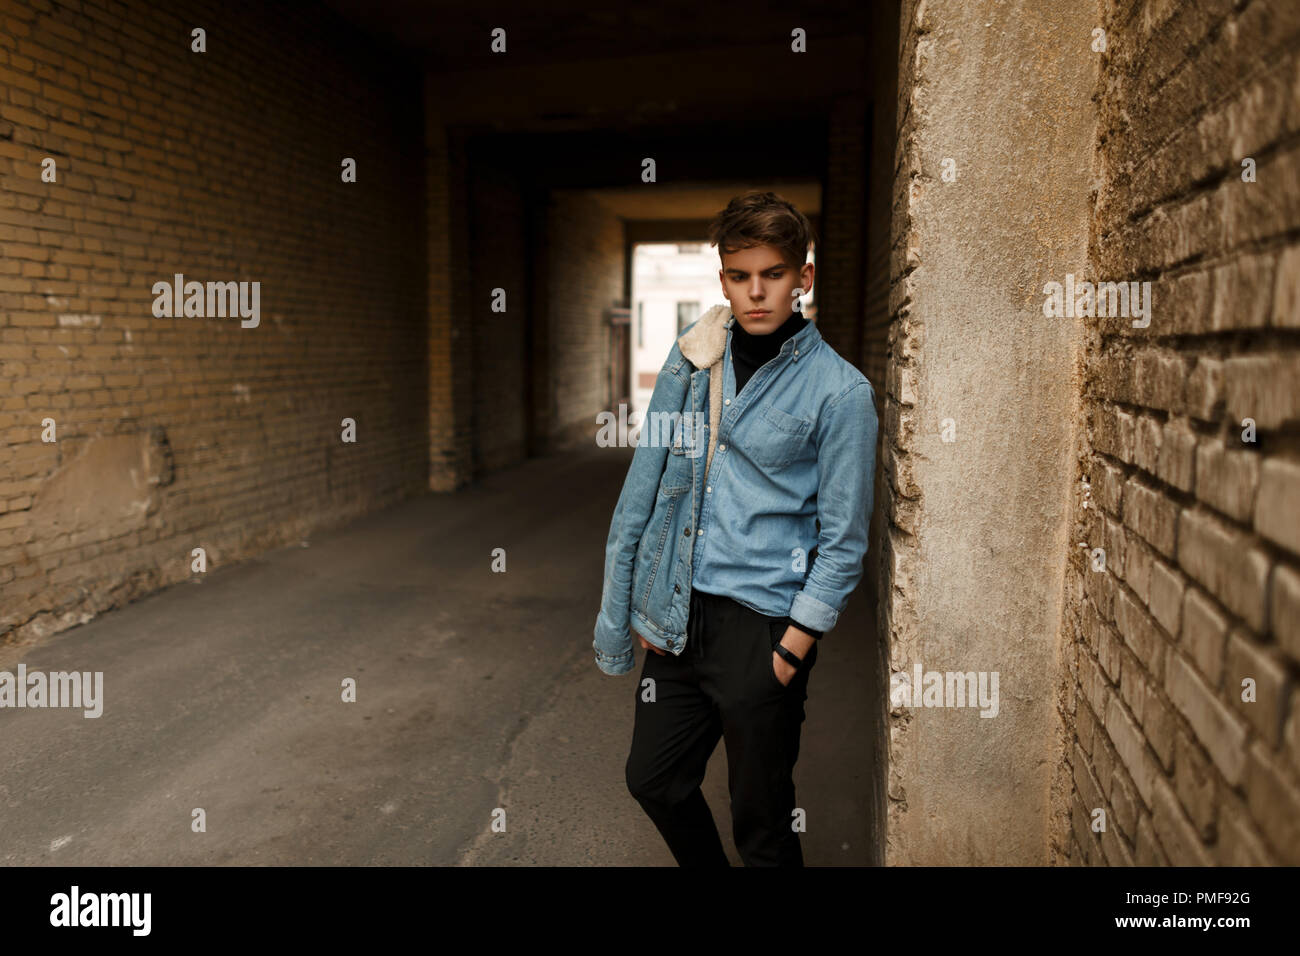 Stylish handsome man in a denim shirt with a trendy denim jacket posing outside near a brick wall Stock Photo